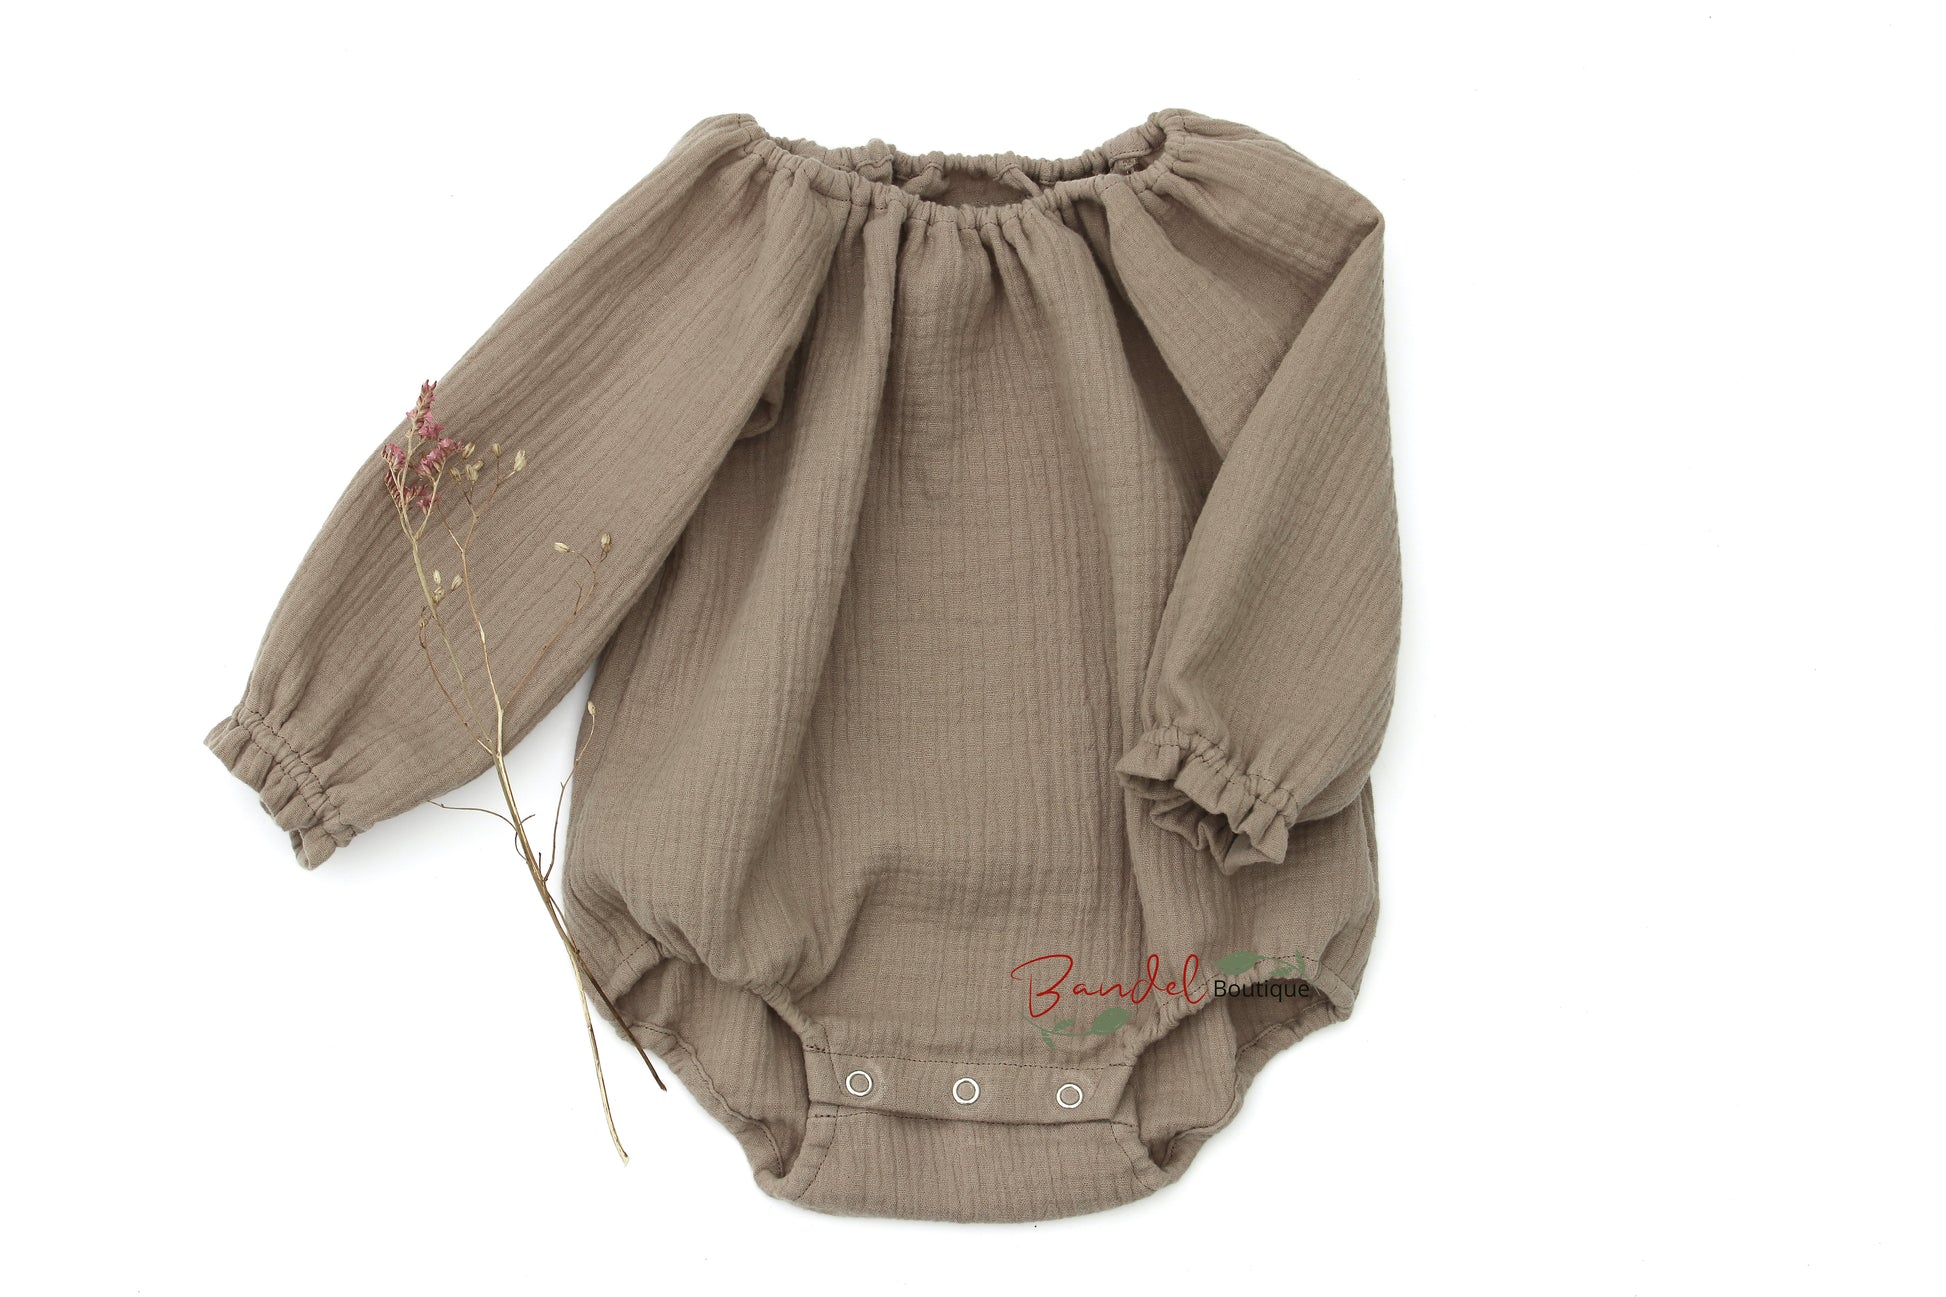 Handmade taupe- brown minimalist newborn baby romper with long sleeves, made from breathable and soft double gauze organic fabric. Features elasticized openings and crotch snaps for easy dressing and maximum comfort. 